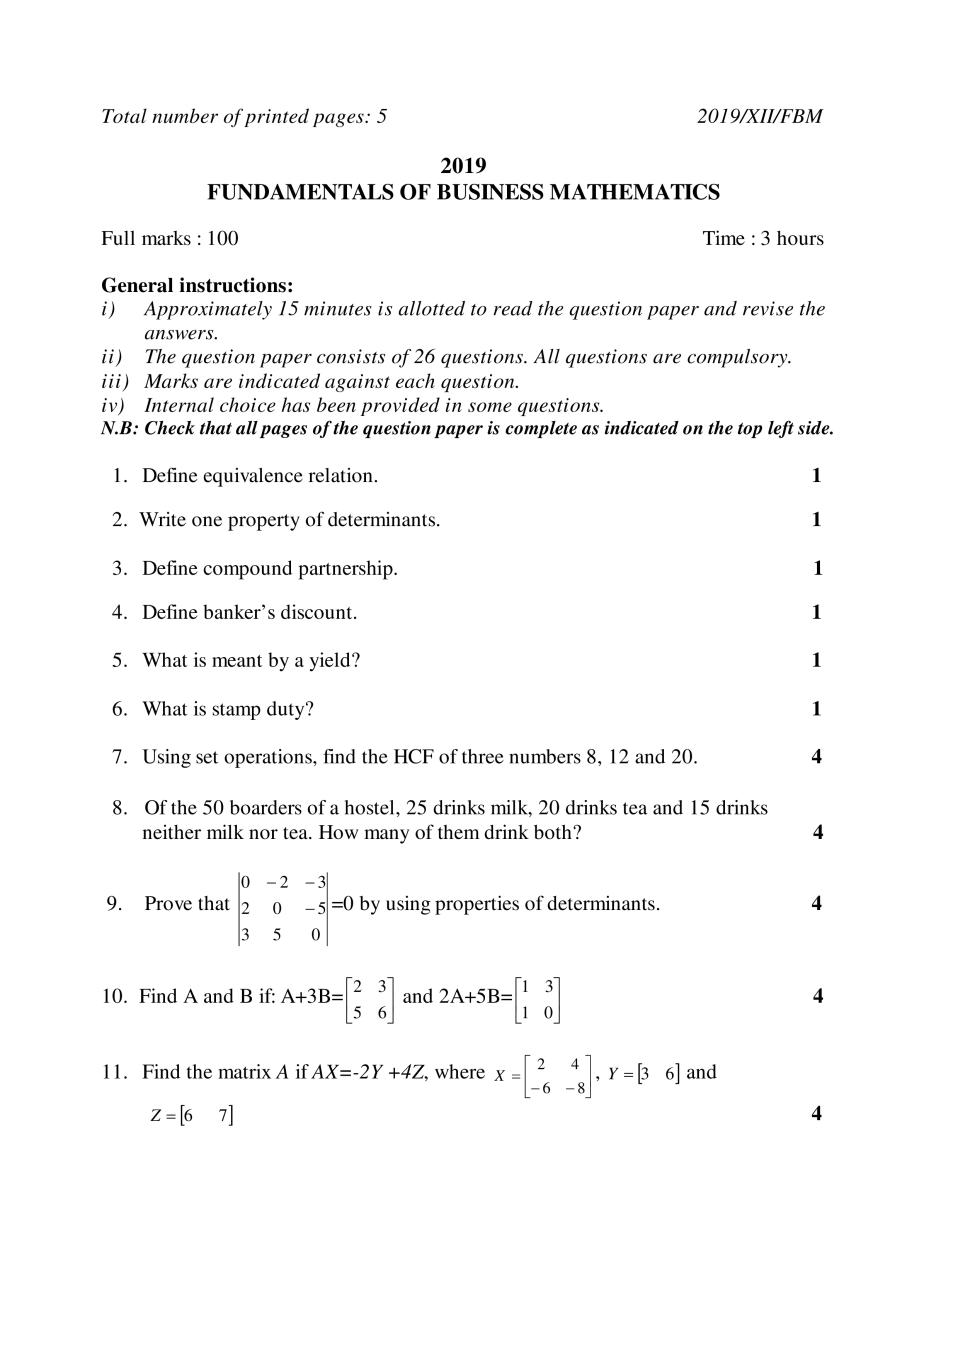 NBSE Class 12 Question Paper 2019 for Fund of Business Maths - Page 1